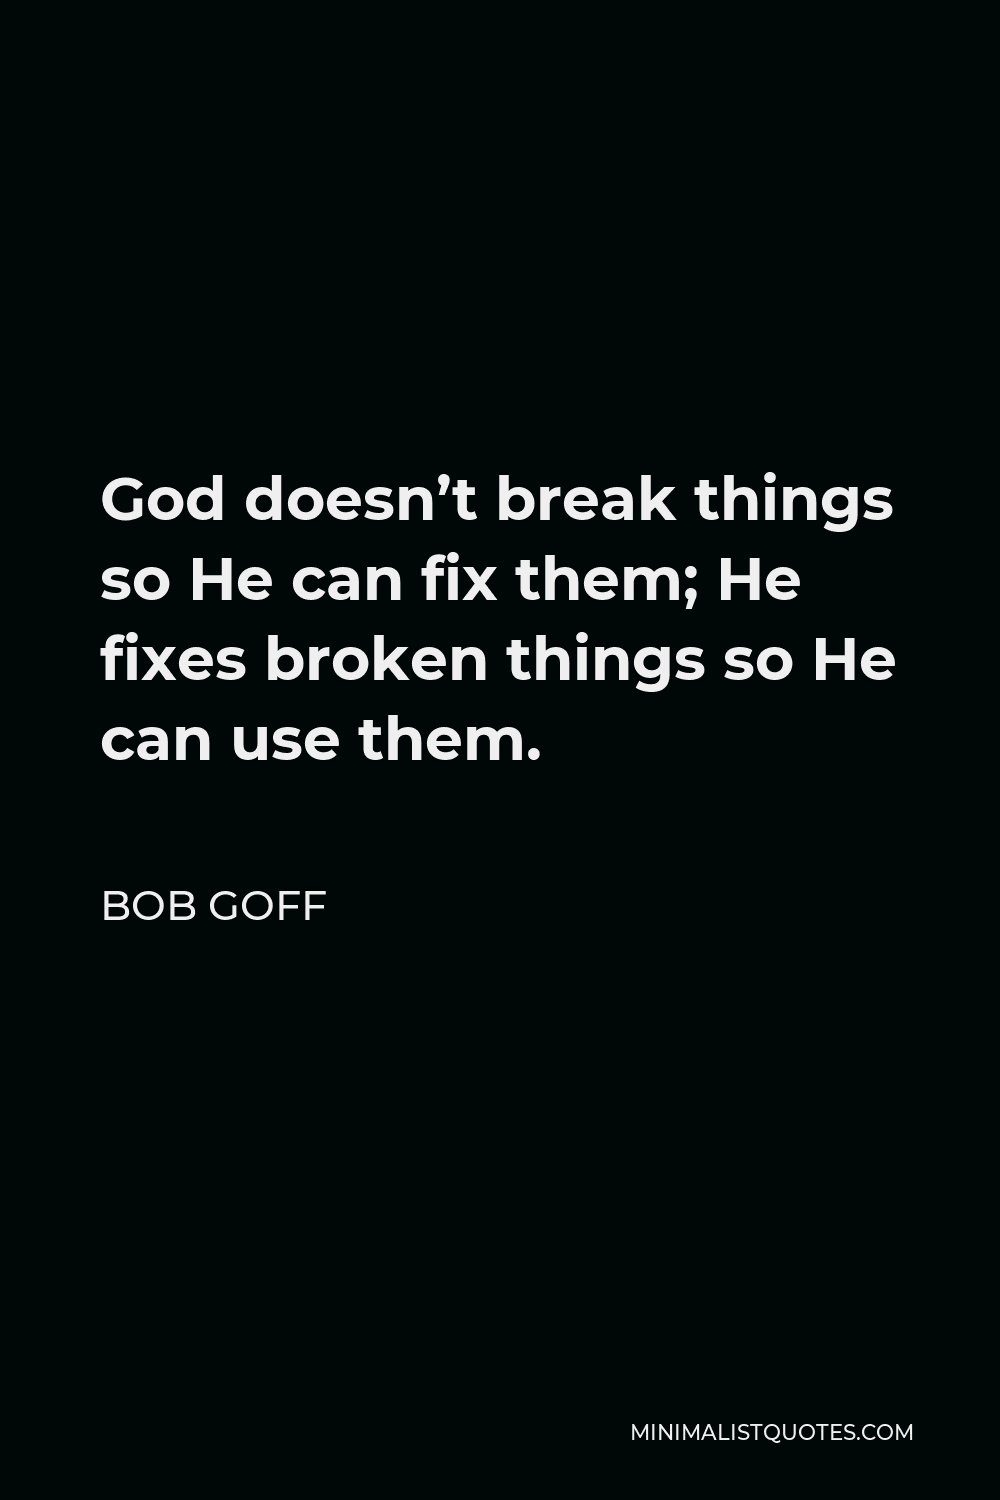 Bob Goff Quote - God doesn’t break things so He can fix them; He fixes broken things so He can use them.